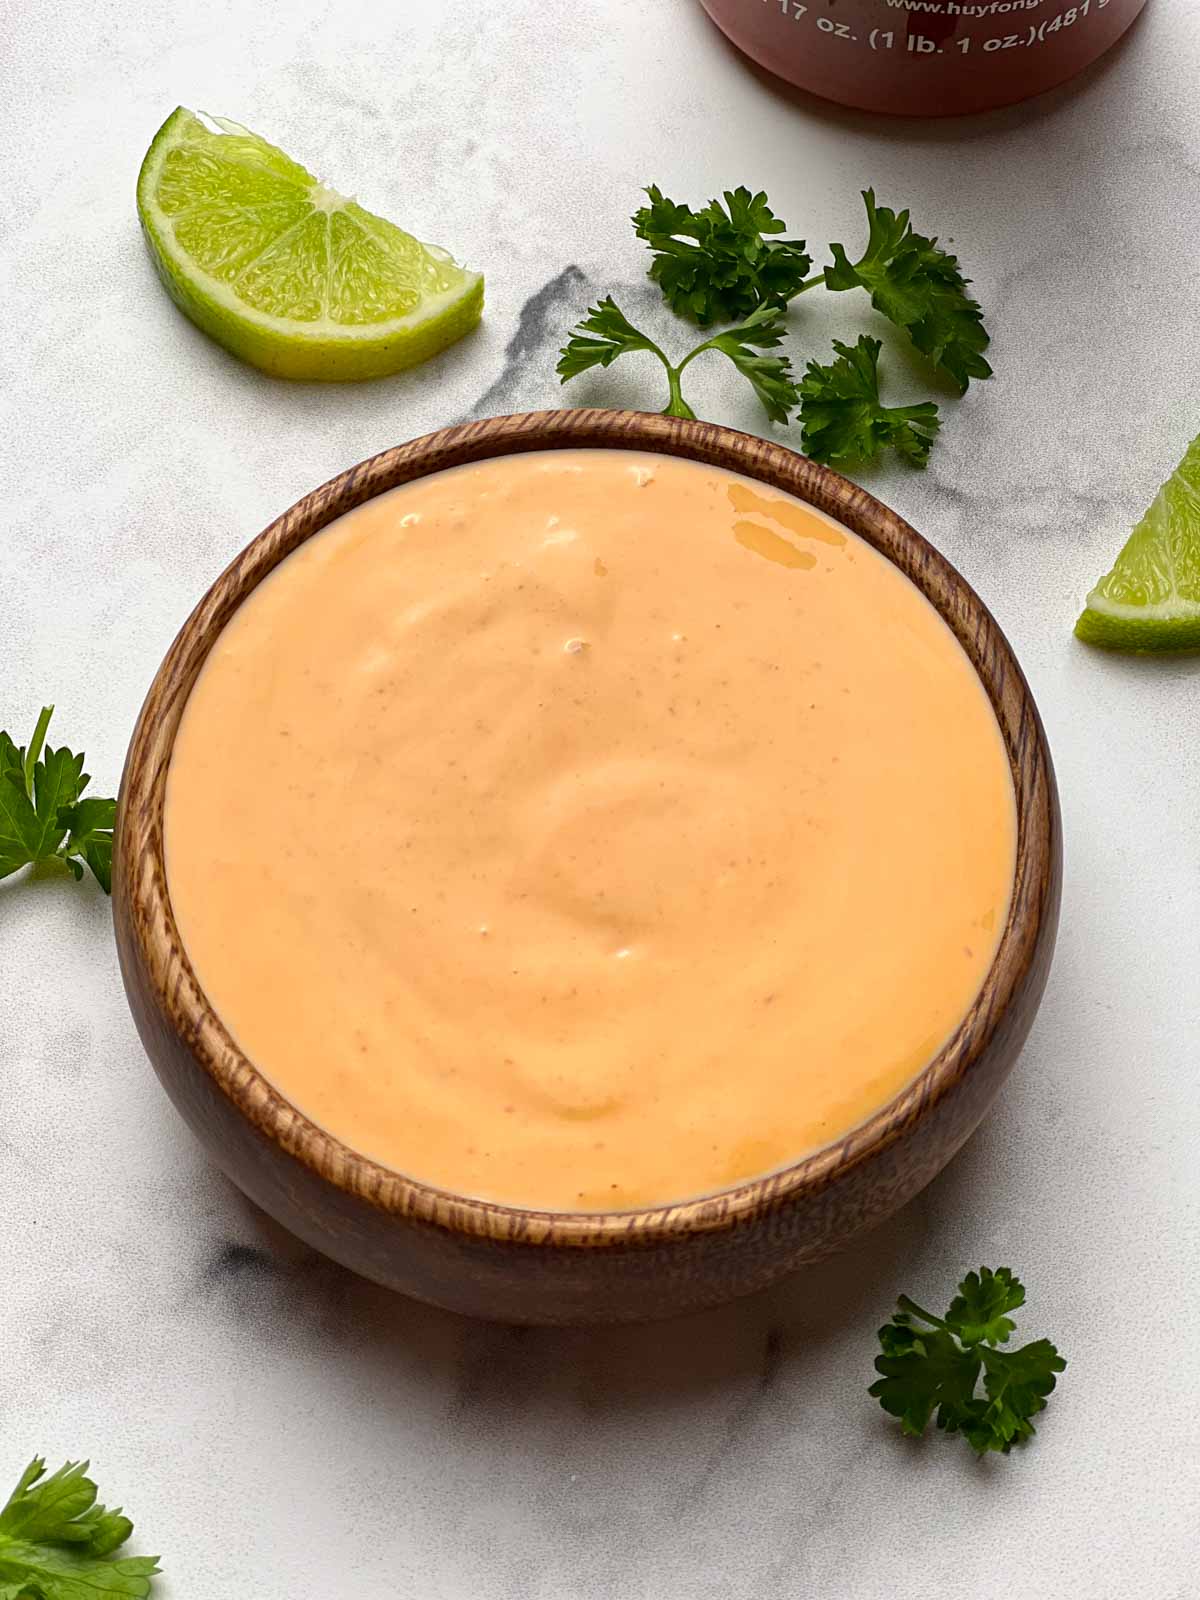 sriracha mayonnaise dip served in a bowl with lime wedges on the side